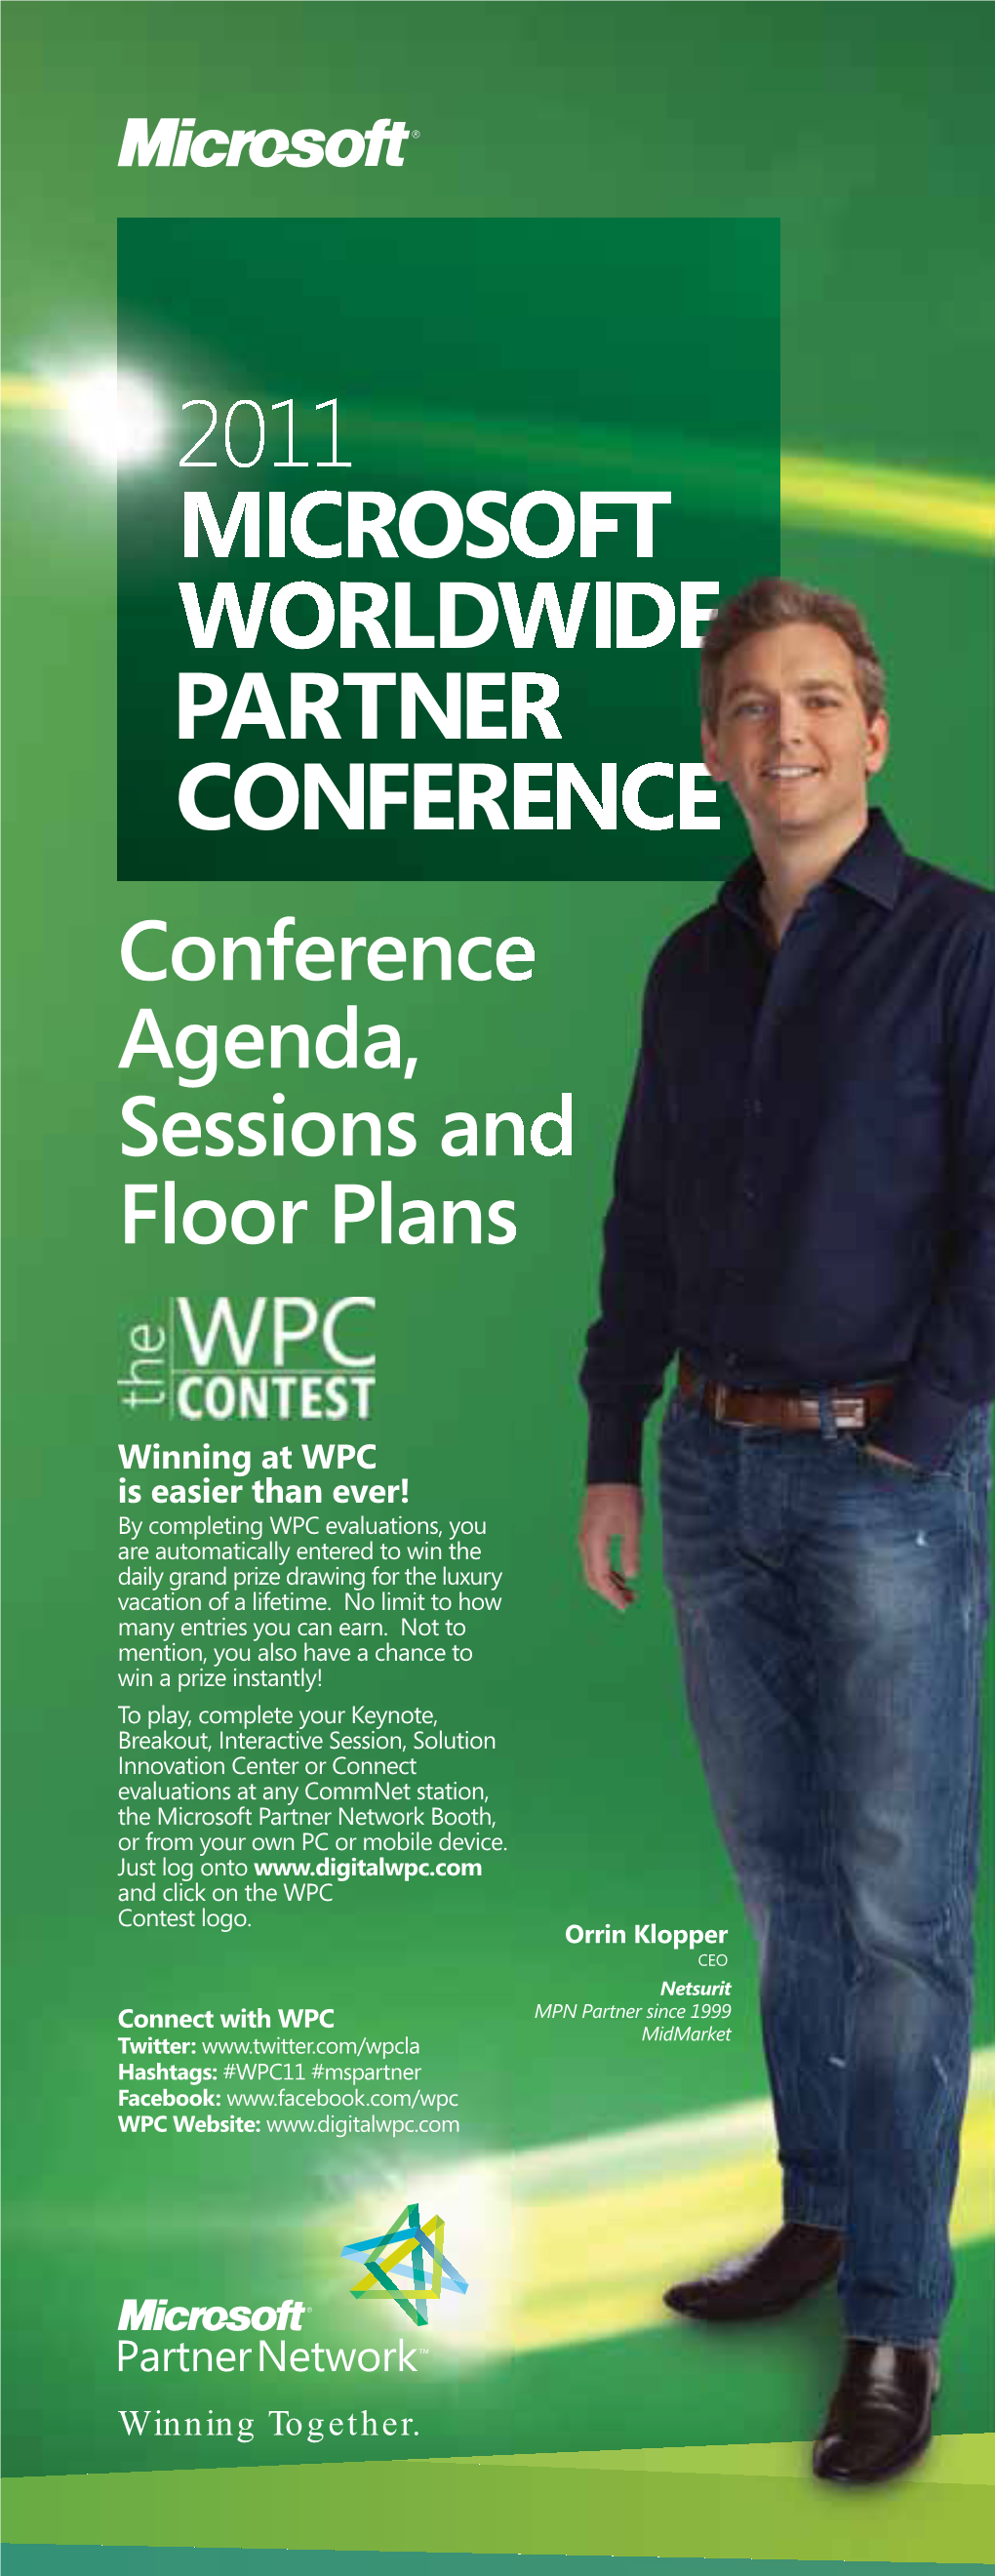 Conference Agenda, Sessions and Floor Plans